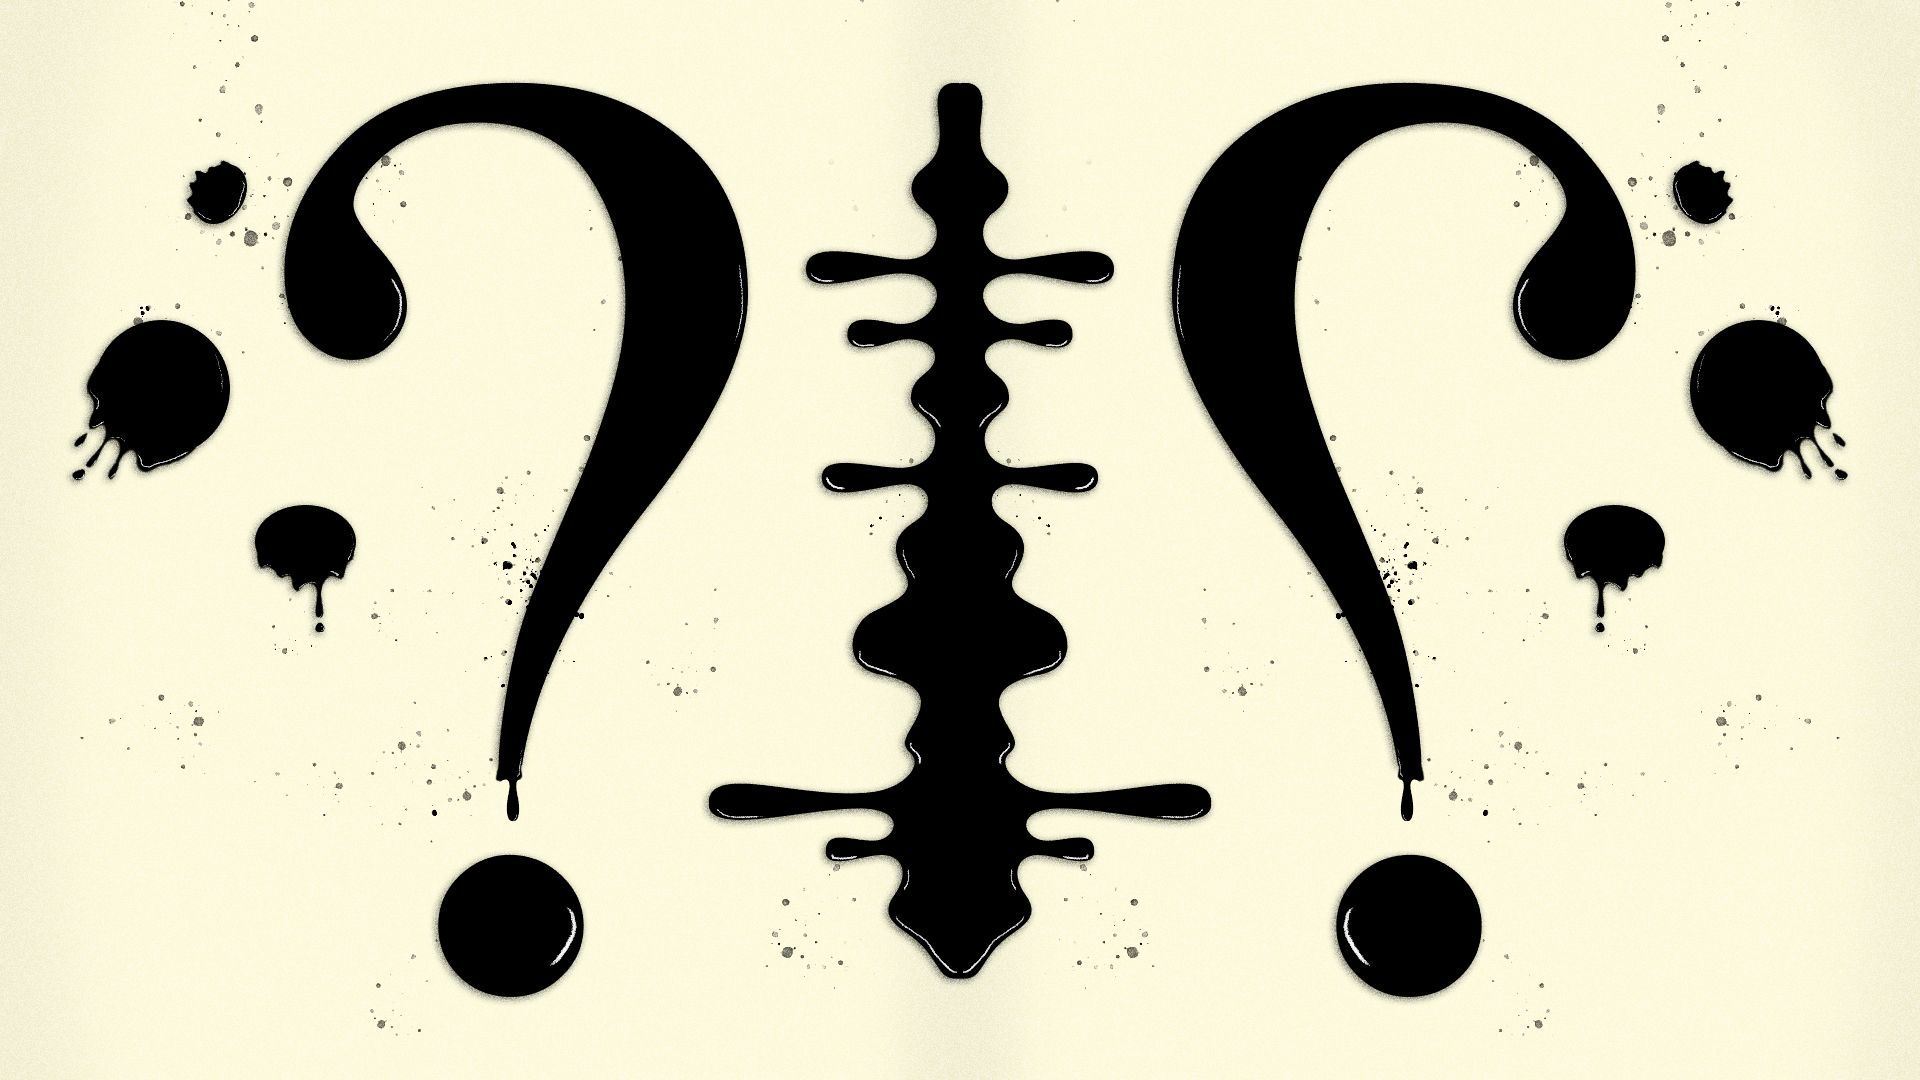 Illustration of a Rorschach test made of oil, depicting question marks.